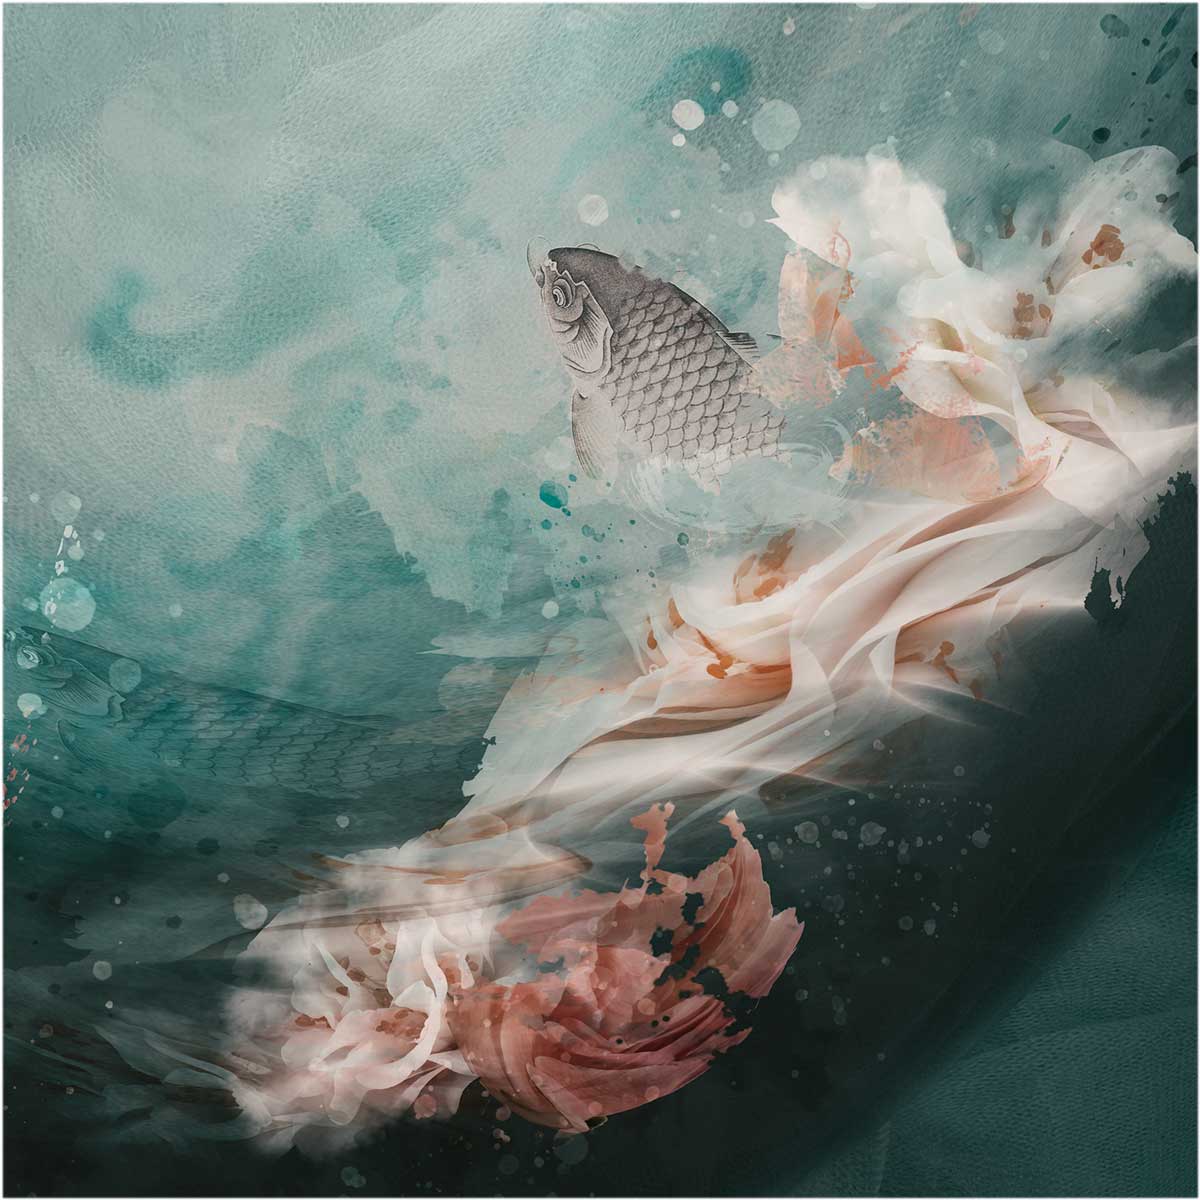 creative photography featuring flowers on a turquoise background with japanese style fish